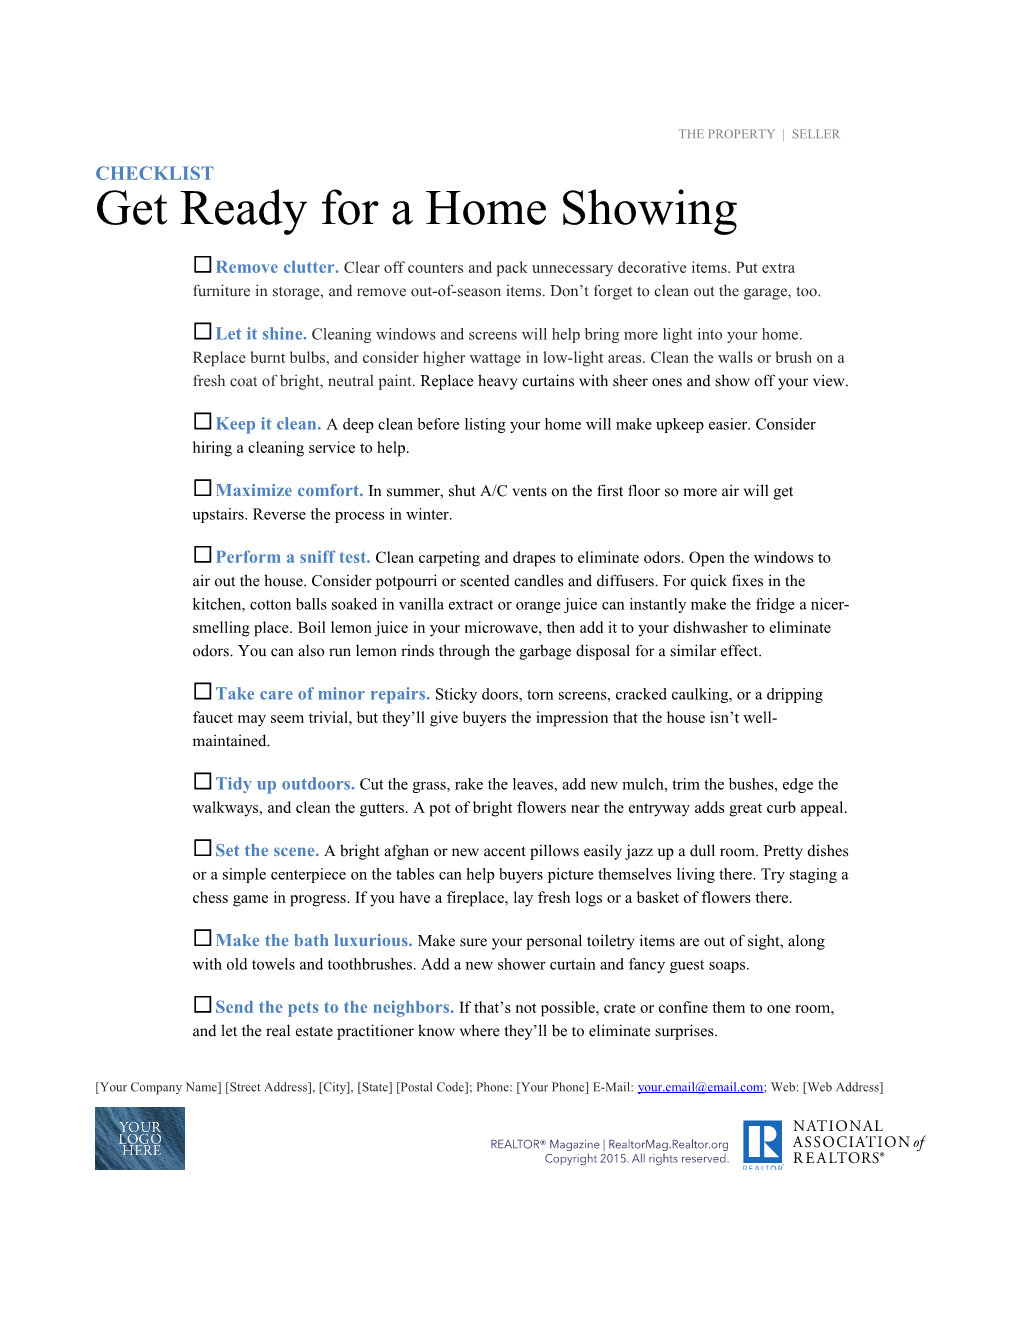 Get Ready for a Home Showing